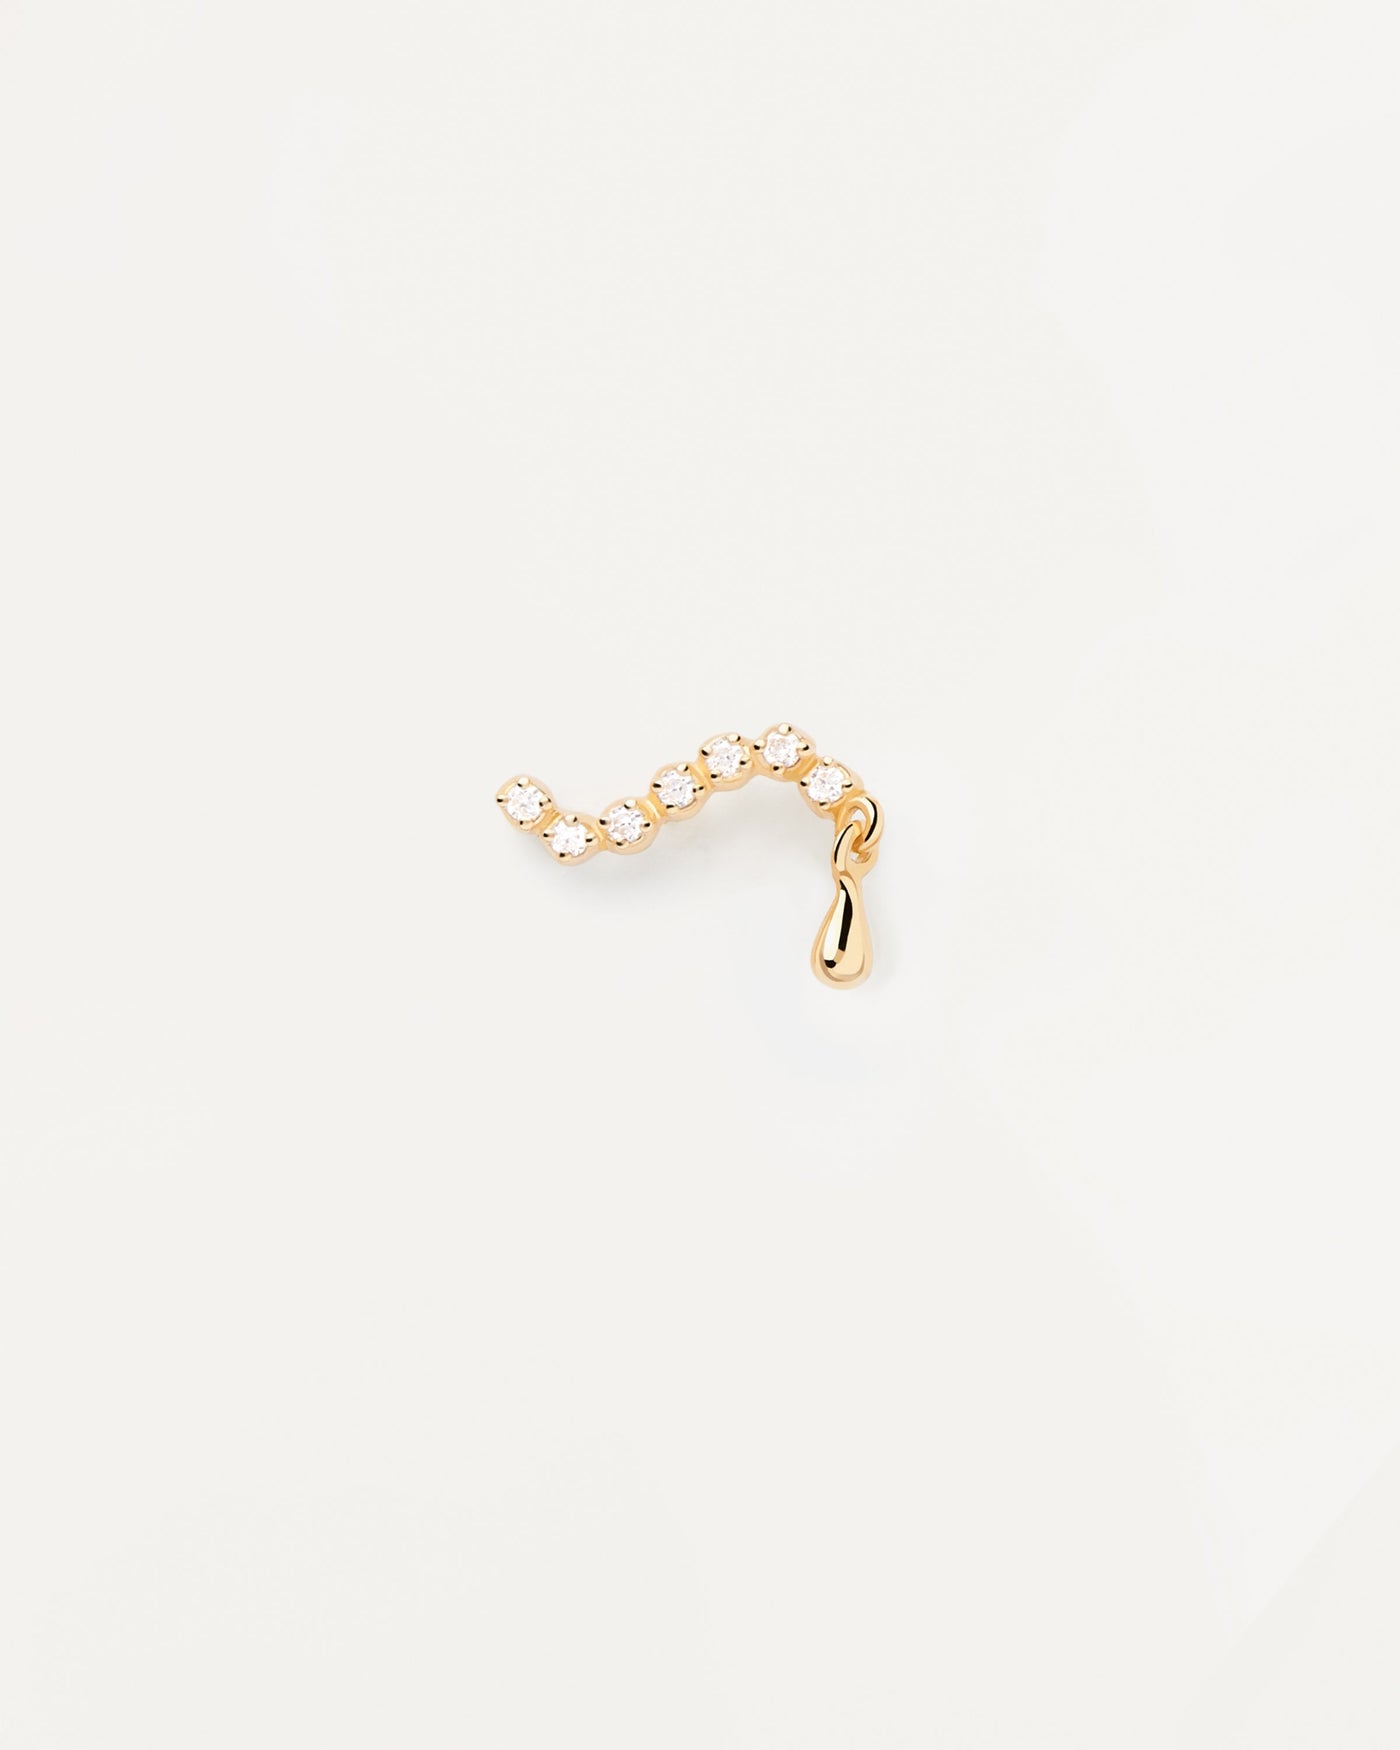 2023 Selection | Swim single stud earring. Wavy ear piercing in gold-plated silver with white zirconia and drop pendant. Get the latest arrival from PDPAOLA. Place your order safely and get this Best Seller. Free Shipping.